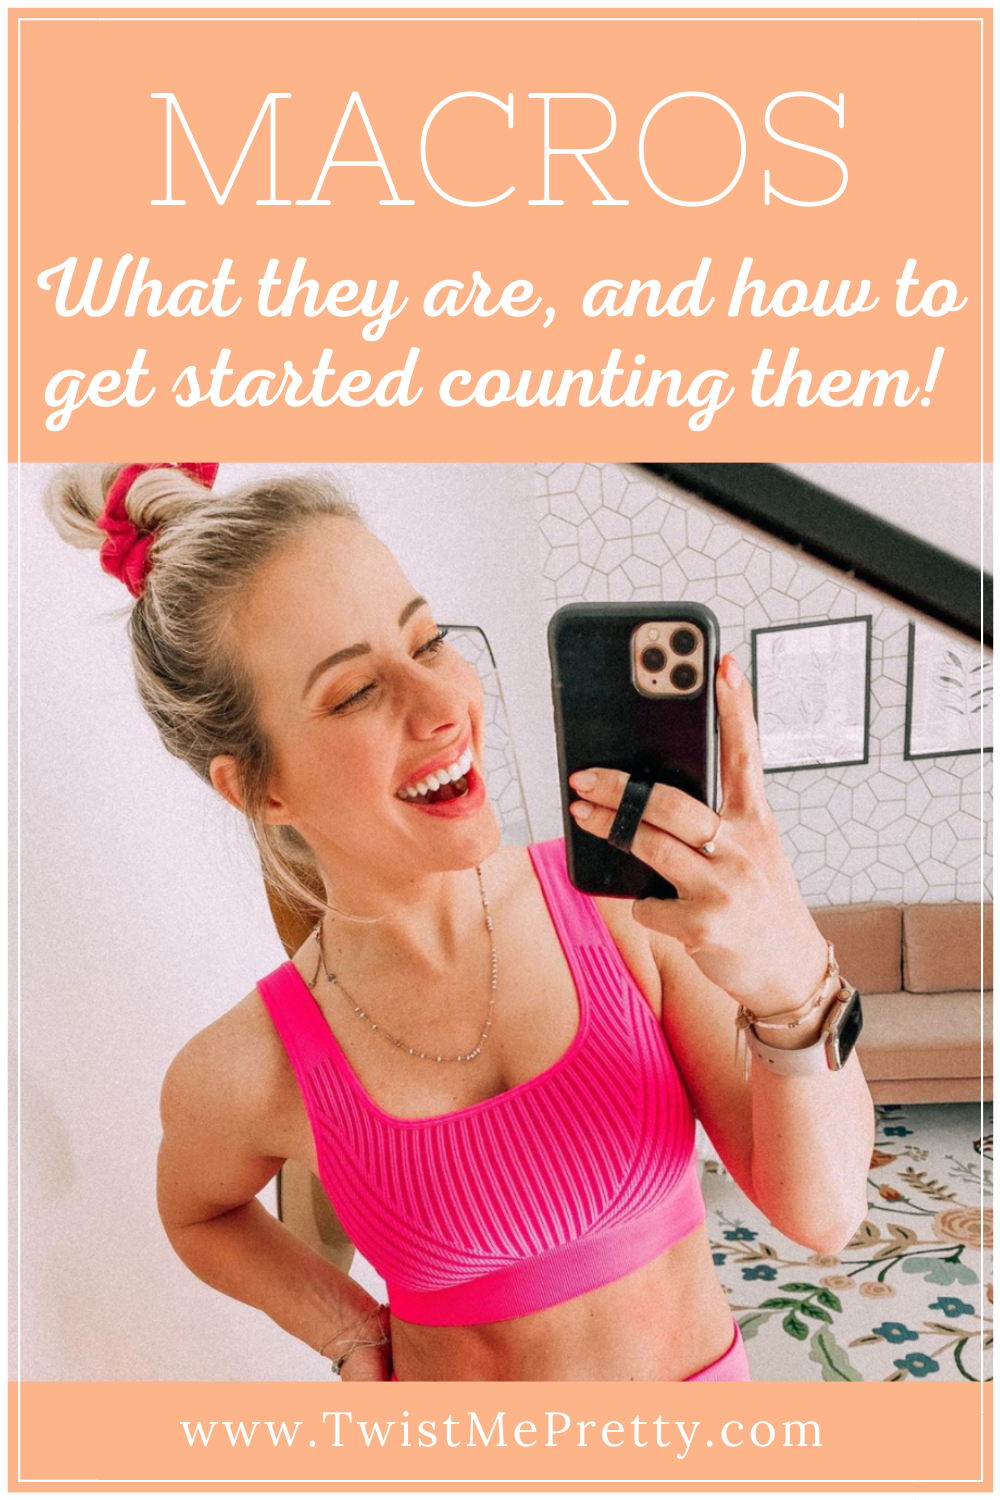 Macros- What they are, and how to get started counting them! www.twistmepretty.com